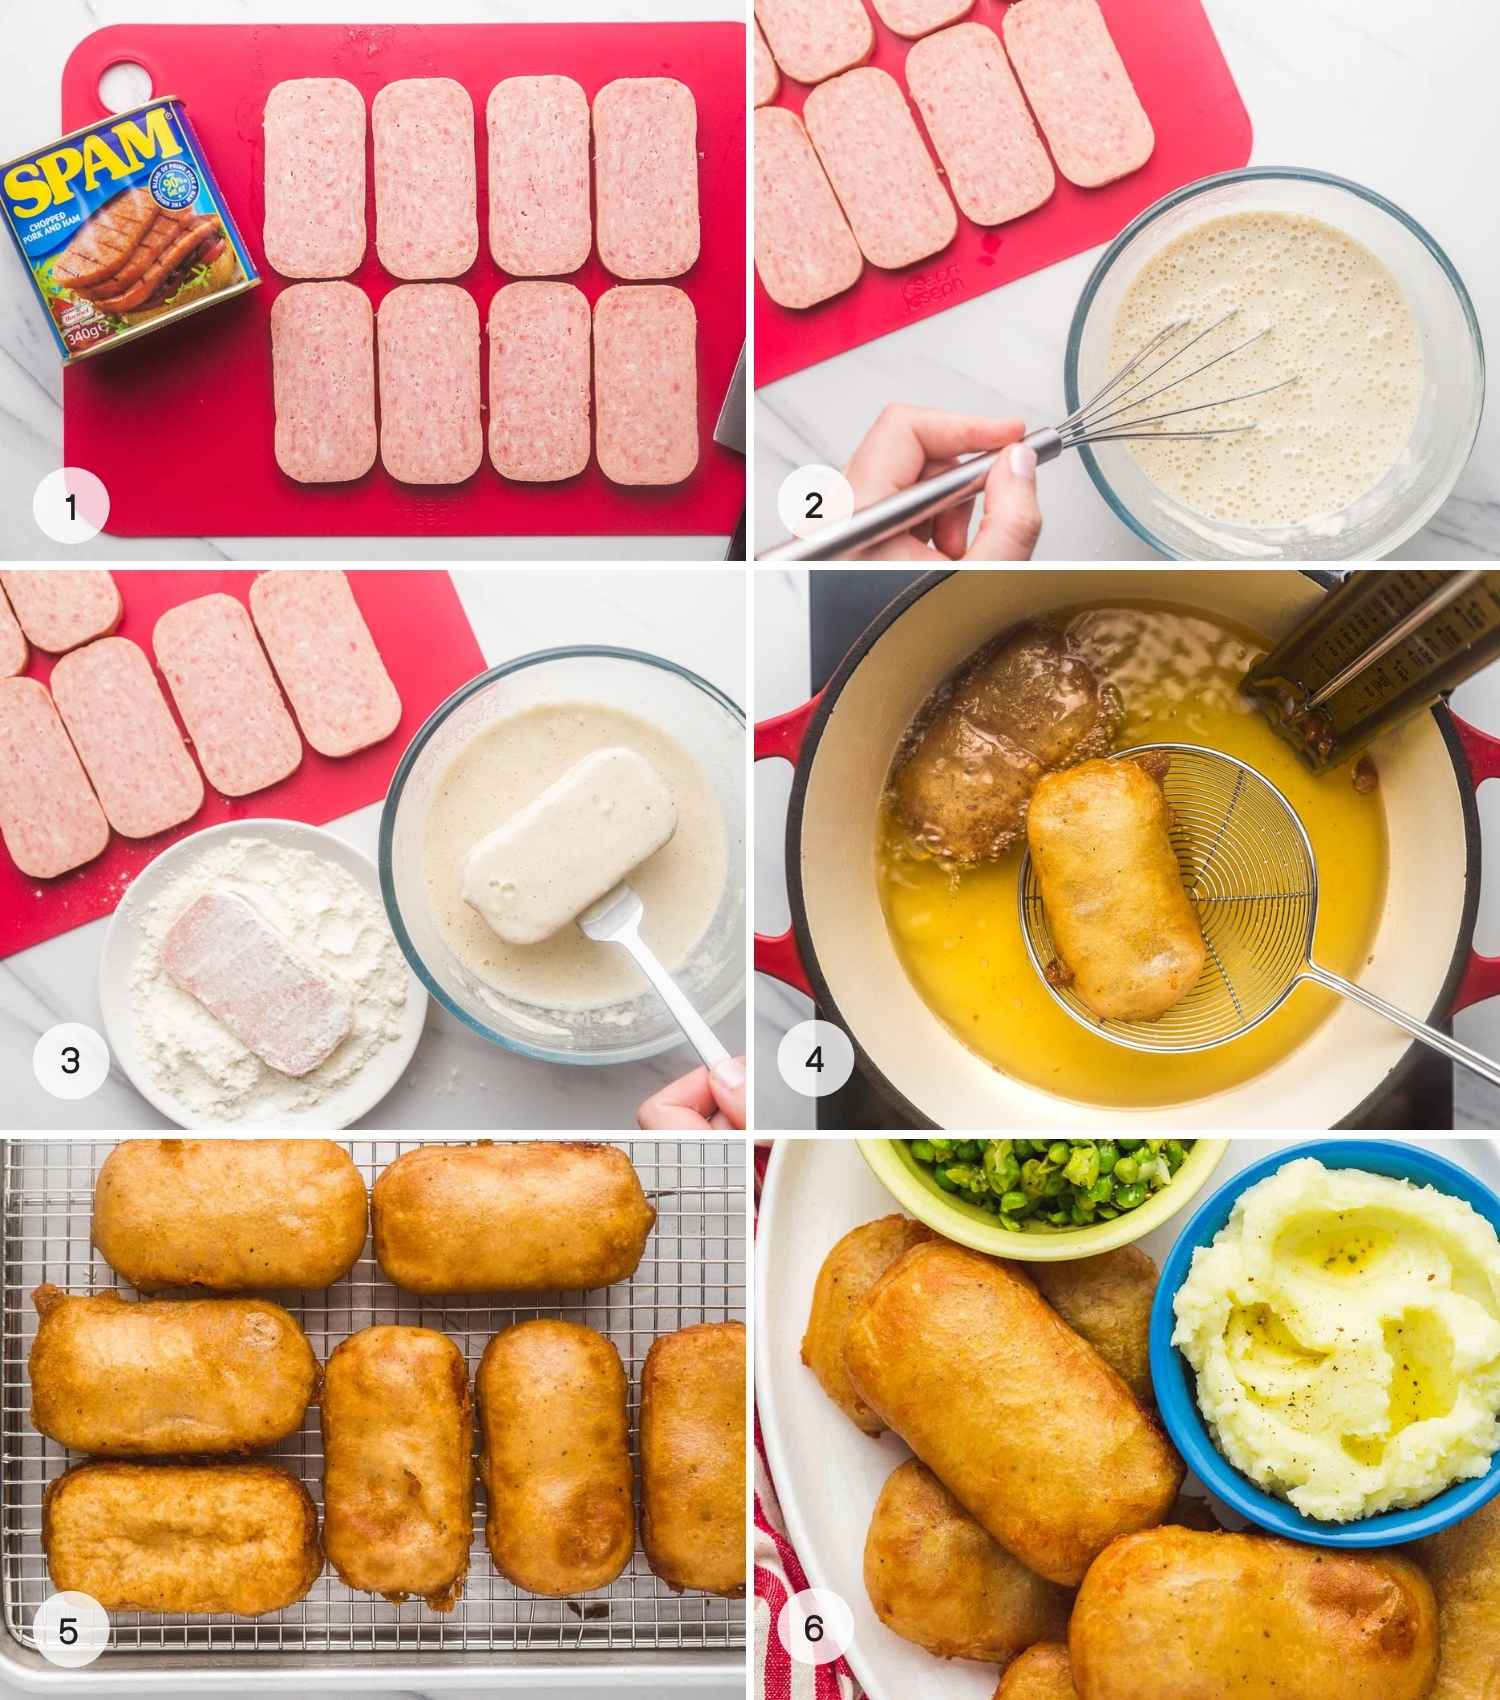 A collage with 6 images on how to make SPAM fritters from cutting the SPAM meat, to making the batter, dipping the SPAM in batter and frying until golden and crispy.